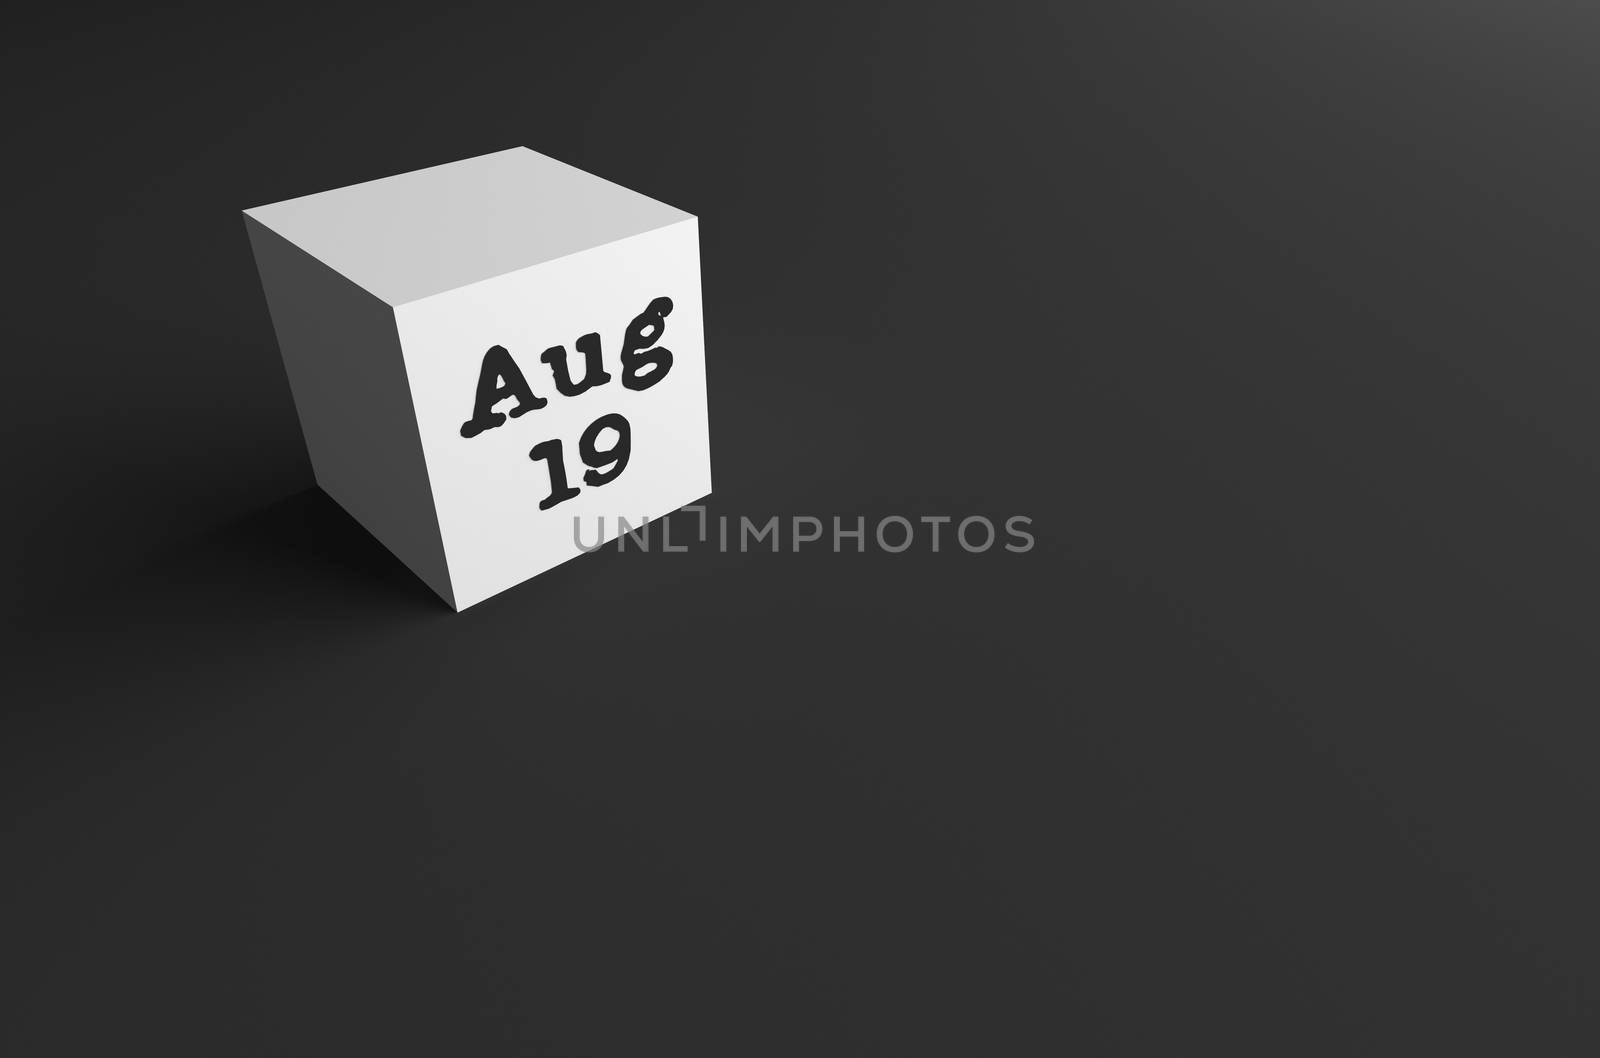 3D RENDERING OF Aug (ABBREVIATION OF AUGUST) 19 ON WHITE CUBE